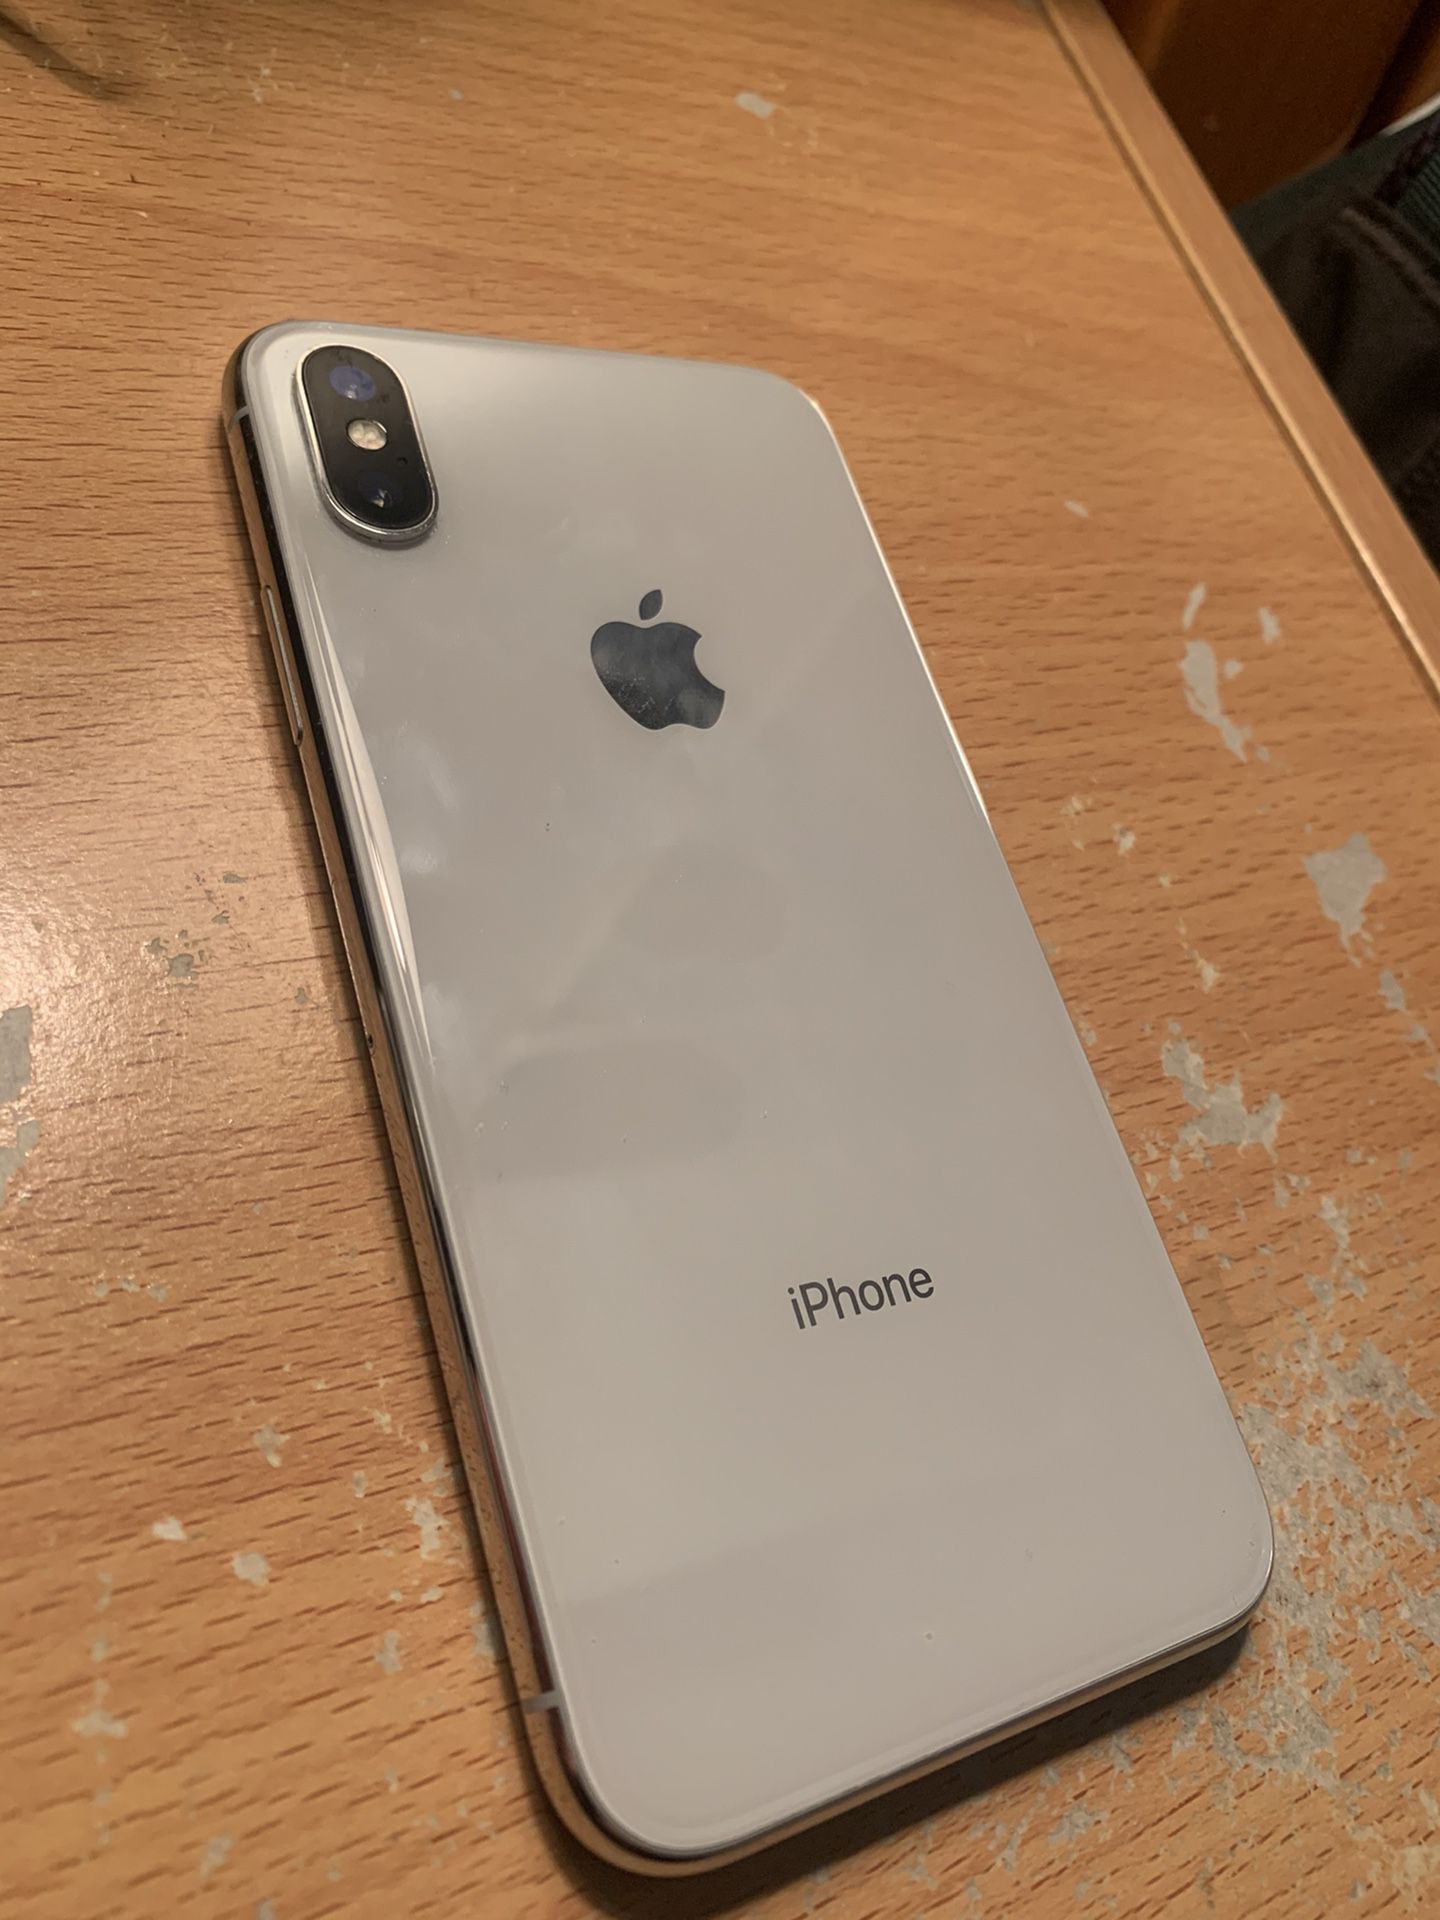 IPhone X with unresponsive screen needs replacement